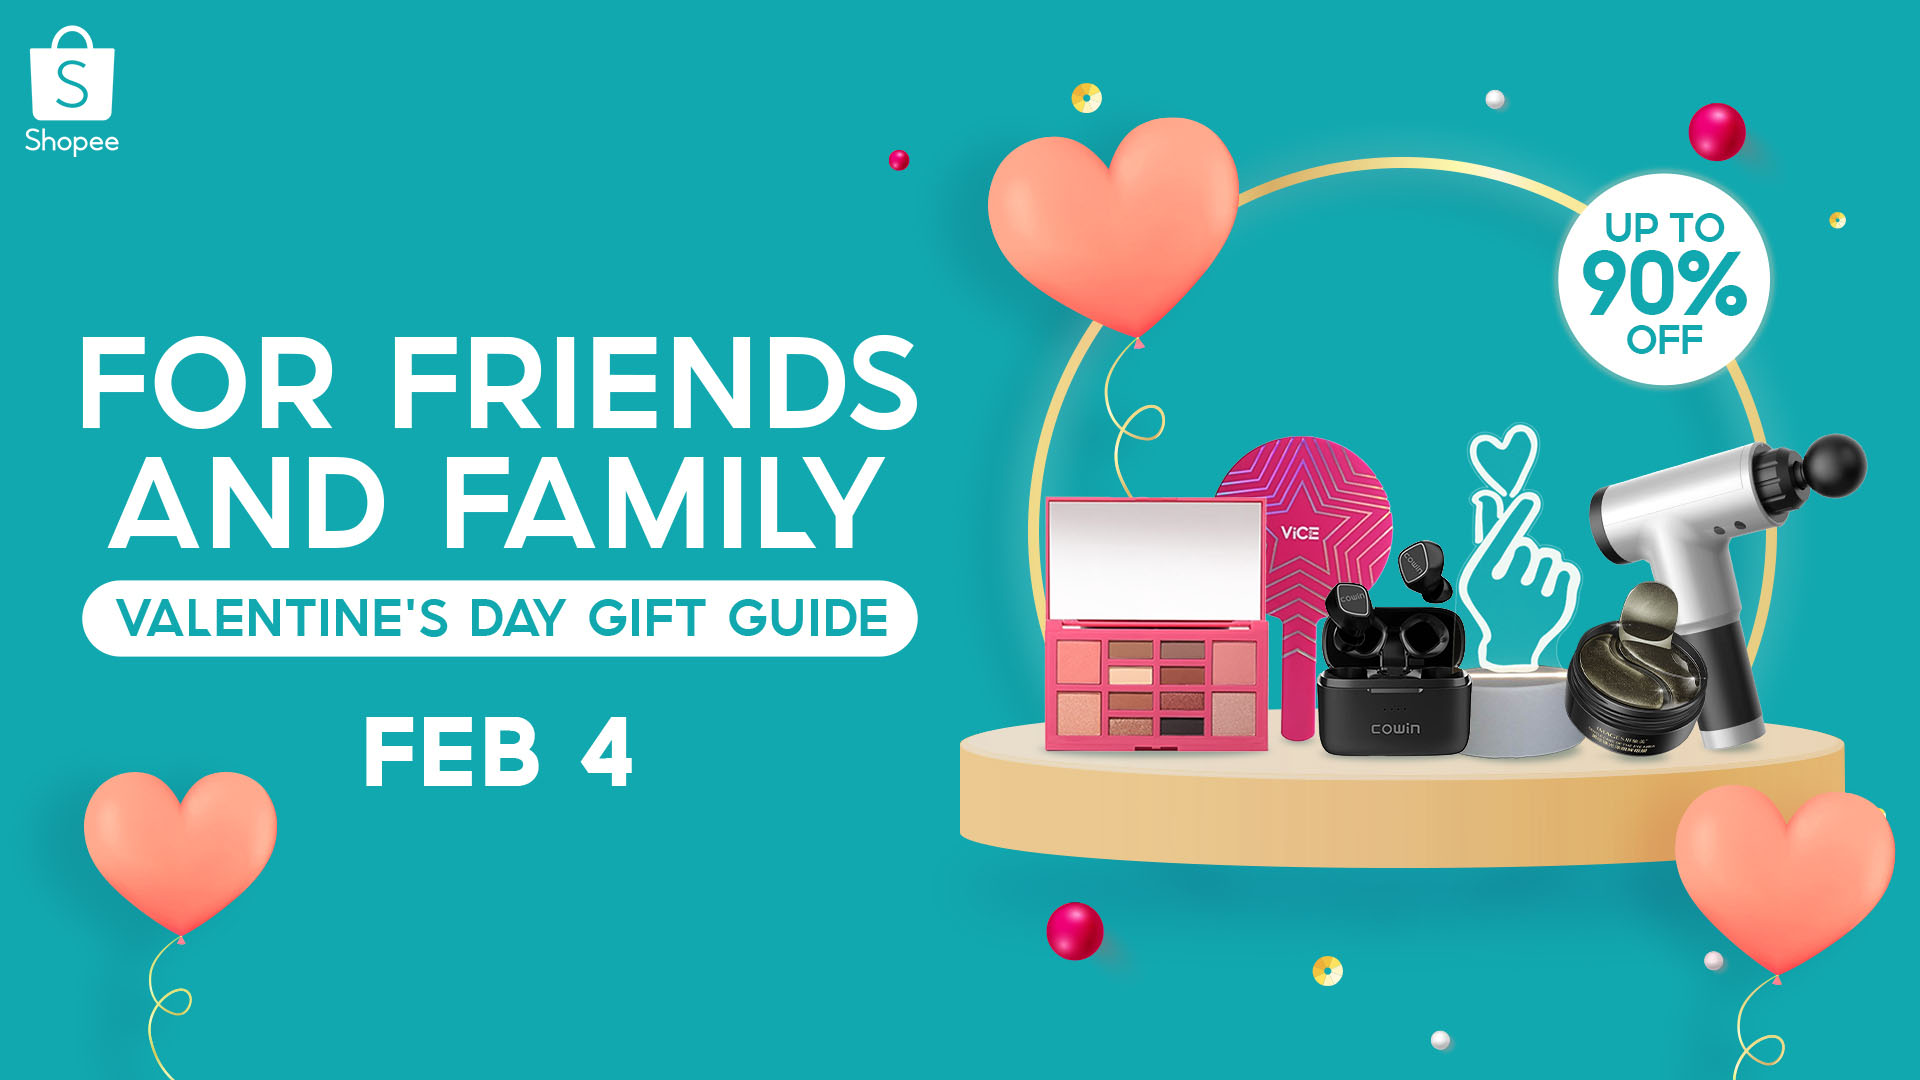 Sweet Gifts for friends and family available on Shopee’s Valentine’s Day Sale